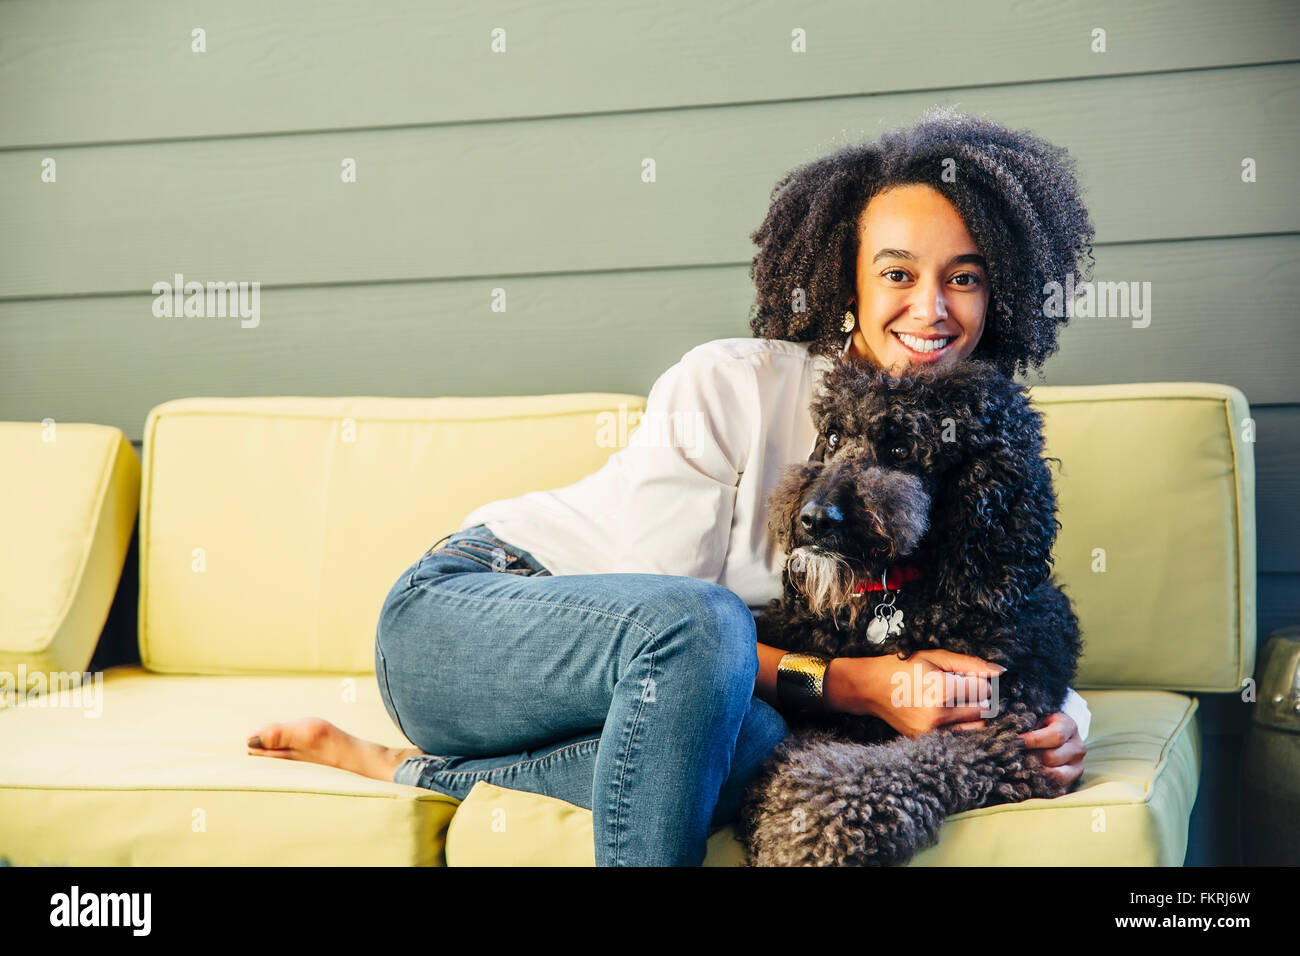 Mixed Race woman petting dog on sofa Banque D'Images